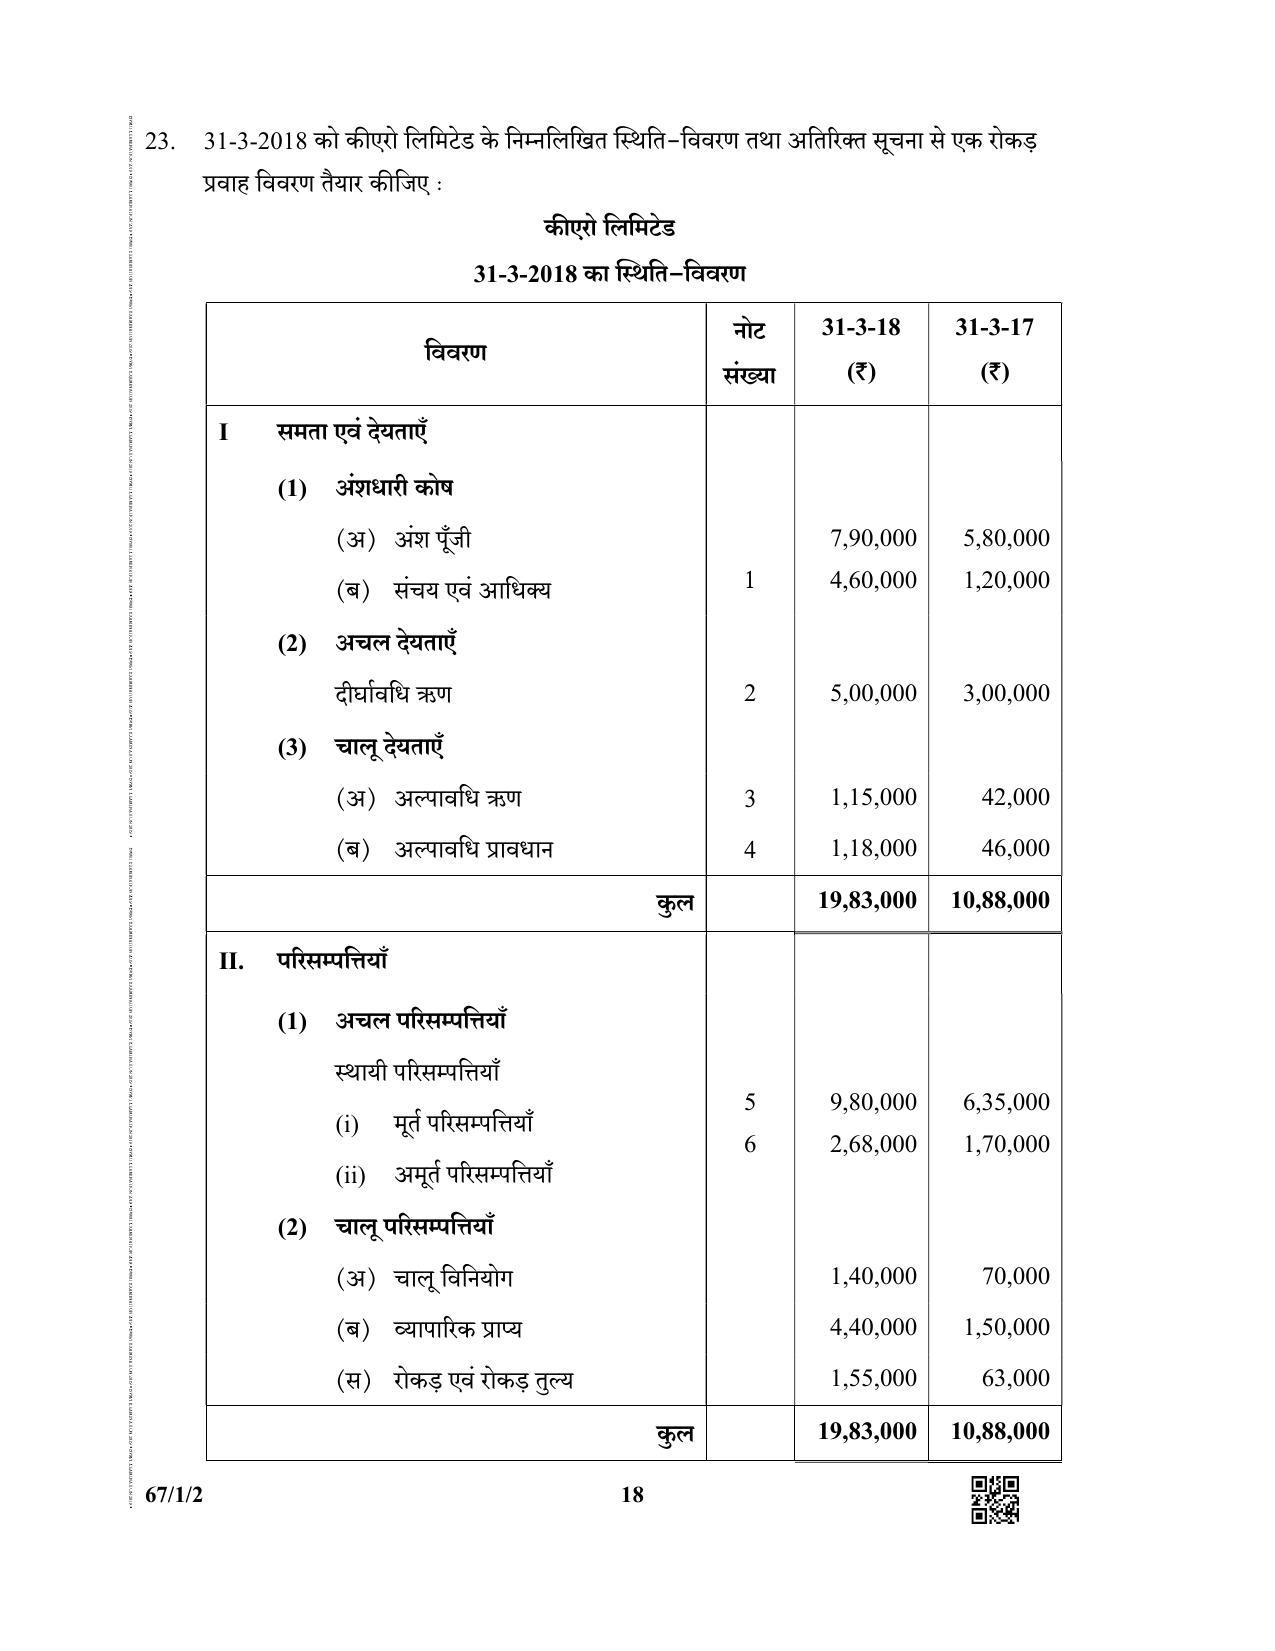 CBSE Class 12 67-1-2  (Accountancy) 2019 Question Paper - Page 18